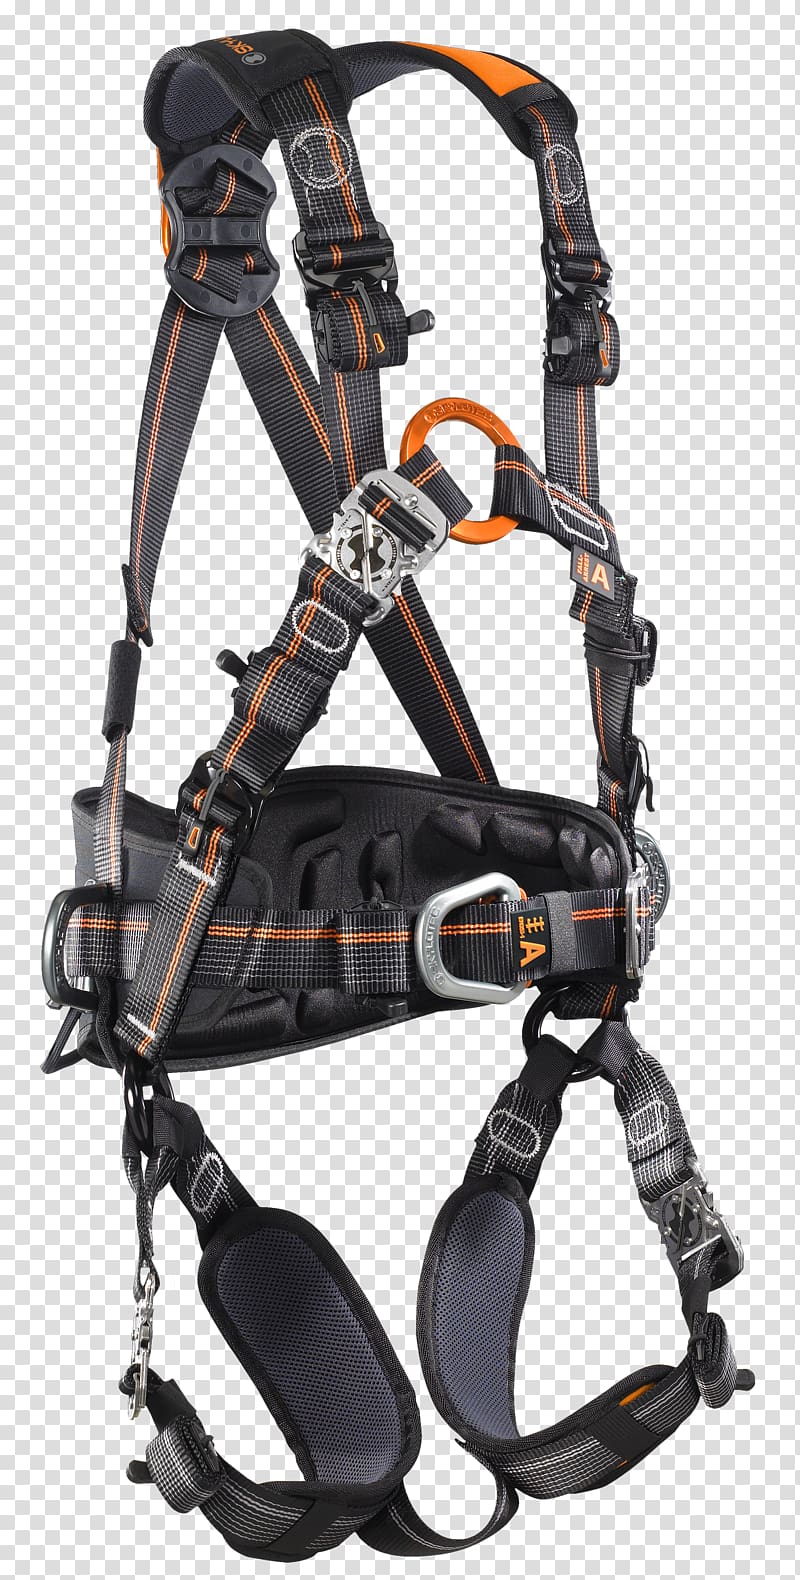 Climbing Harnesses SKYLOTEC Safety harness Personal protective equipment, Skylotec transparent background PNG clipart